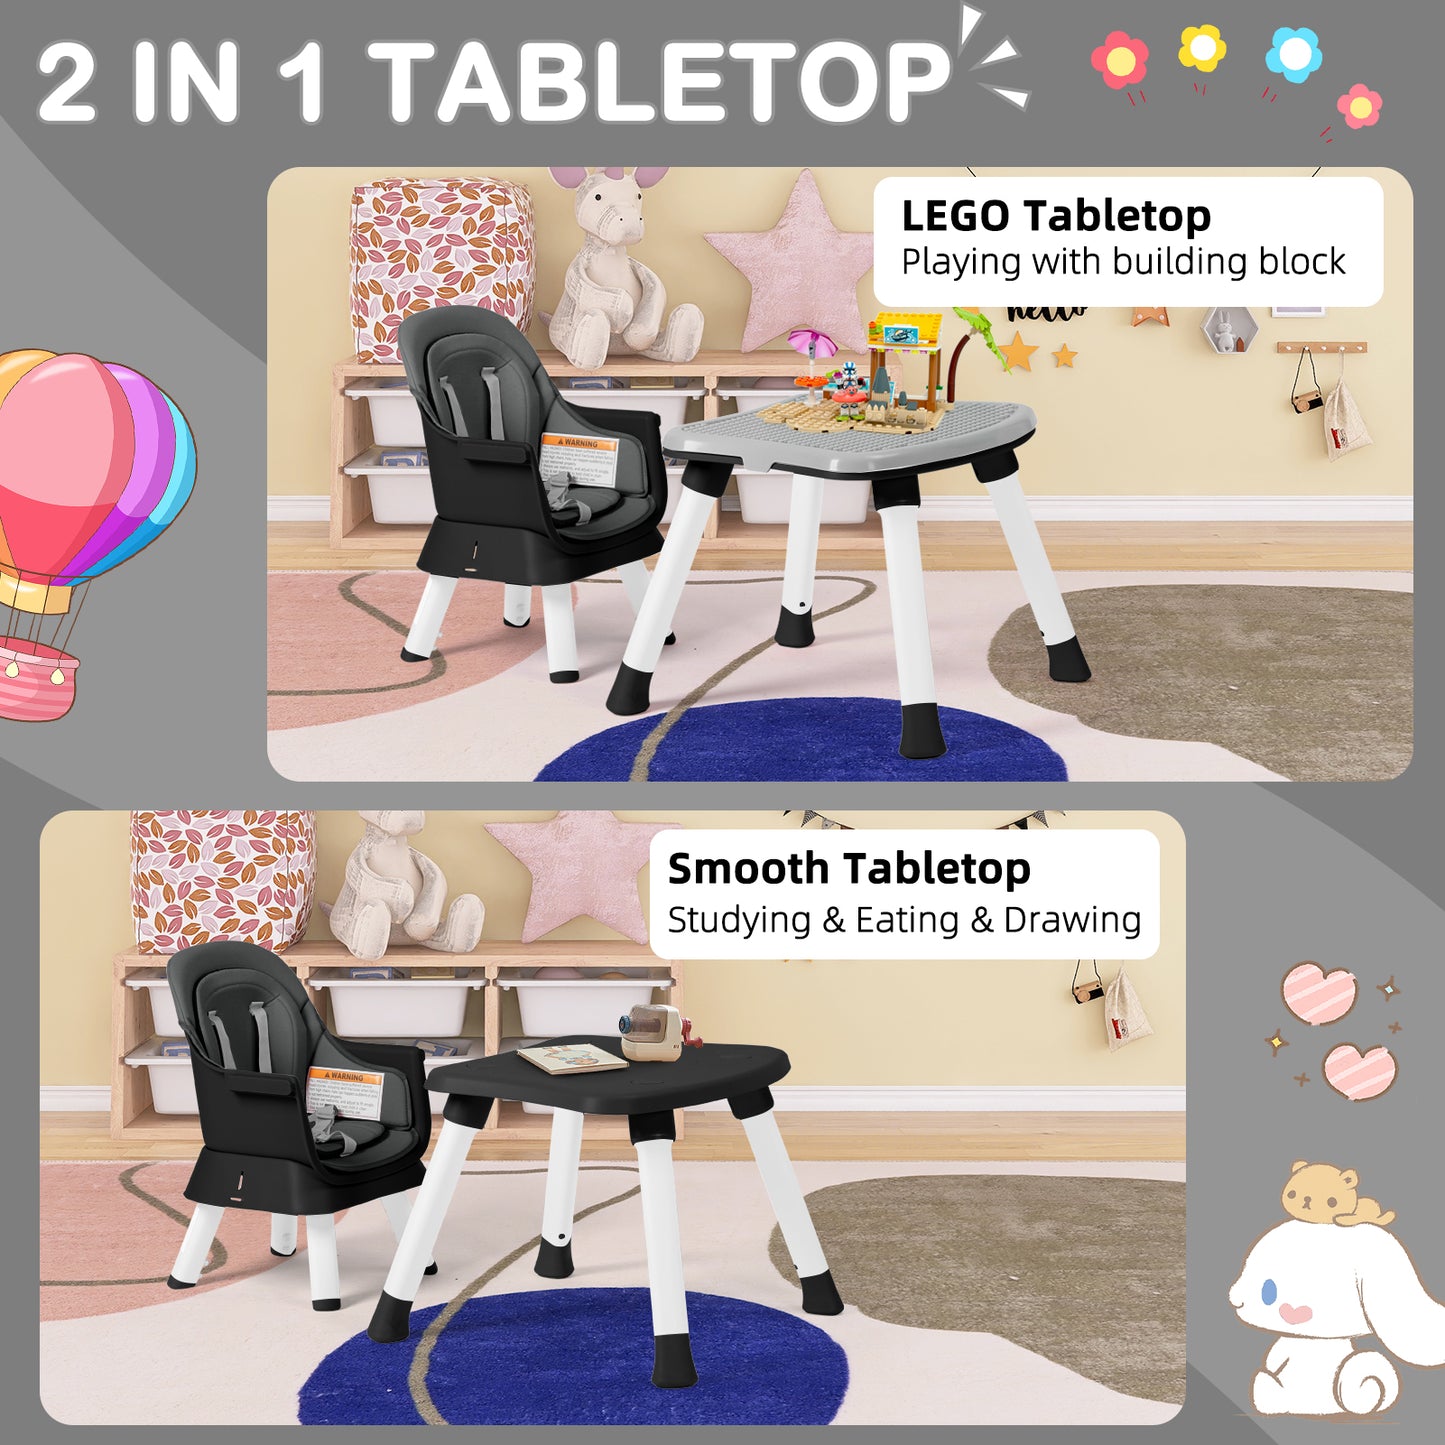 8 in 1 Baby High Chair, Toddler Dining Booster Seat/Kids Table & Chair Set/Building Block Table/Kids Stool, Grey